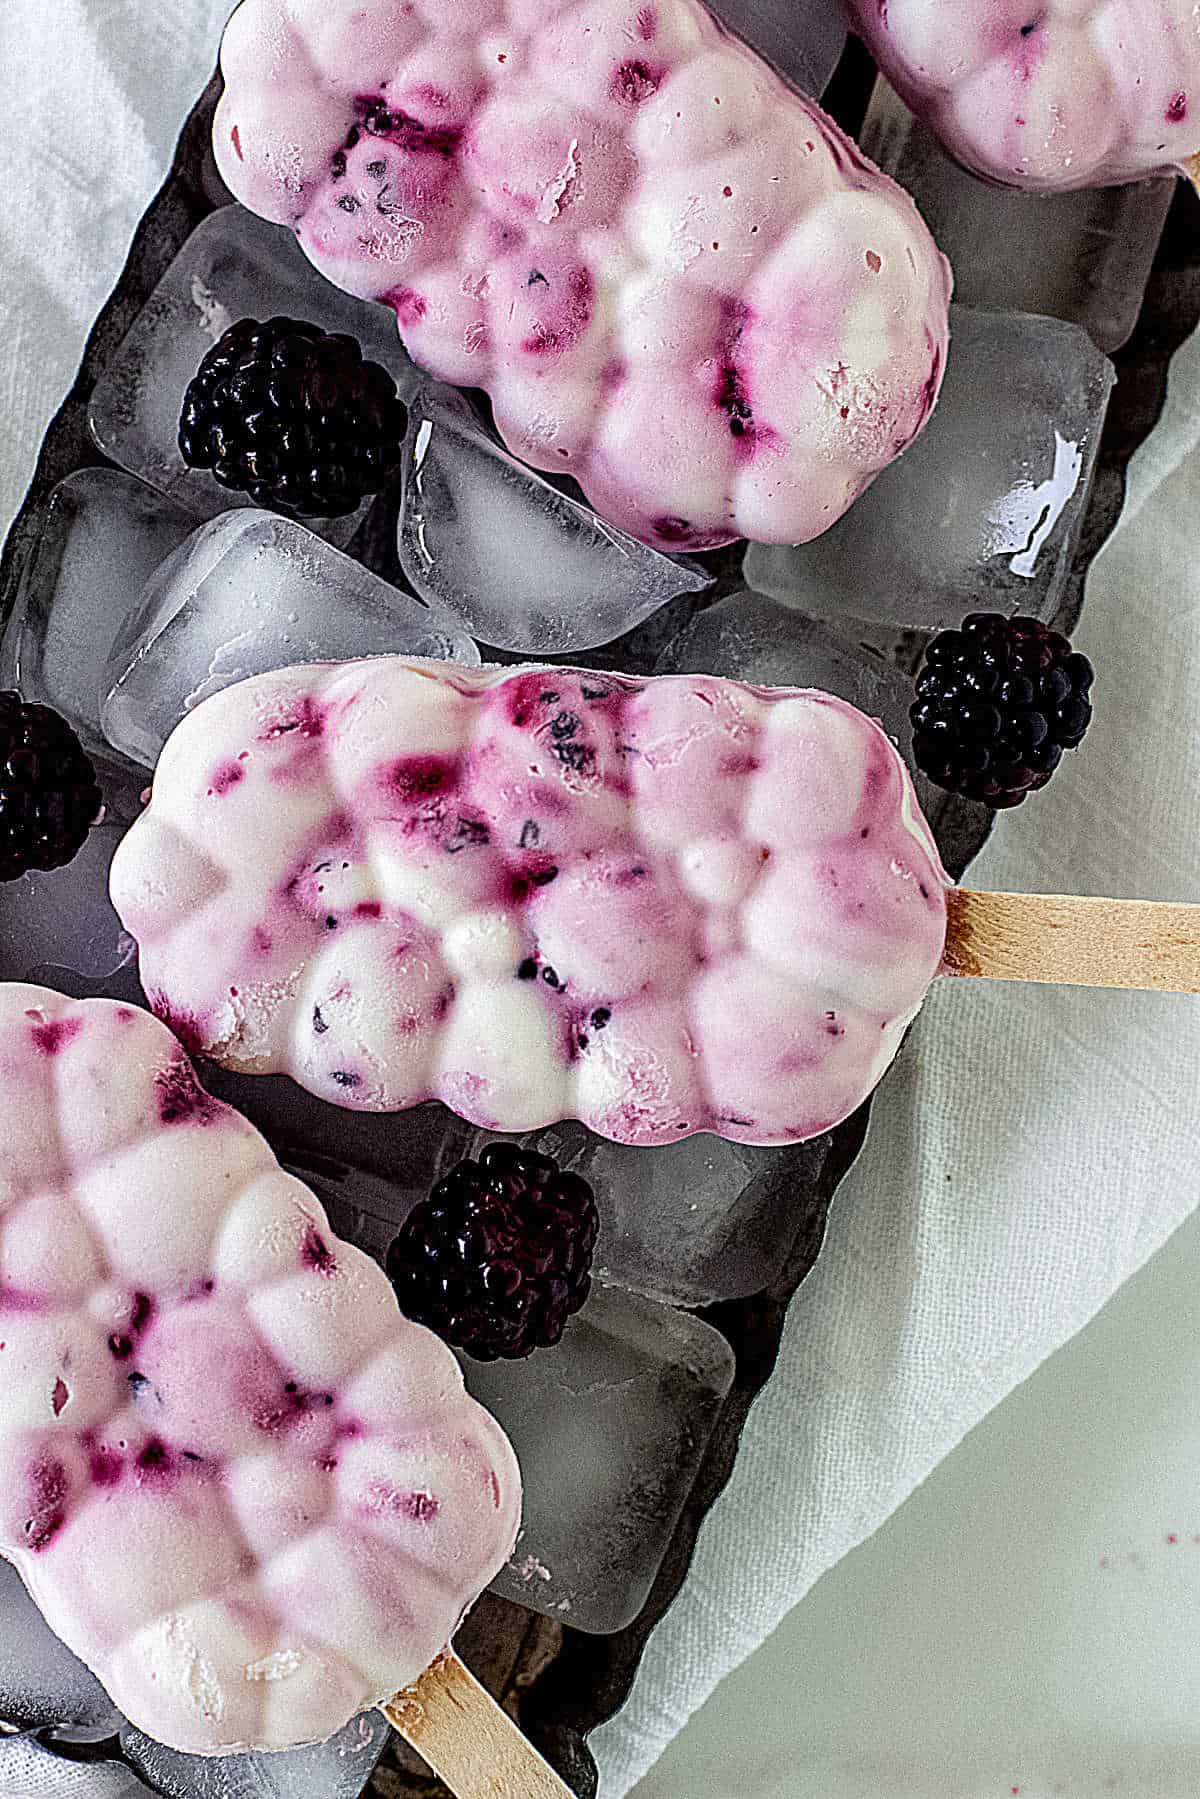 Overview of several bubble shaped berry ice cream popsicles on ice cubes in metal pan.